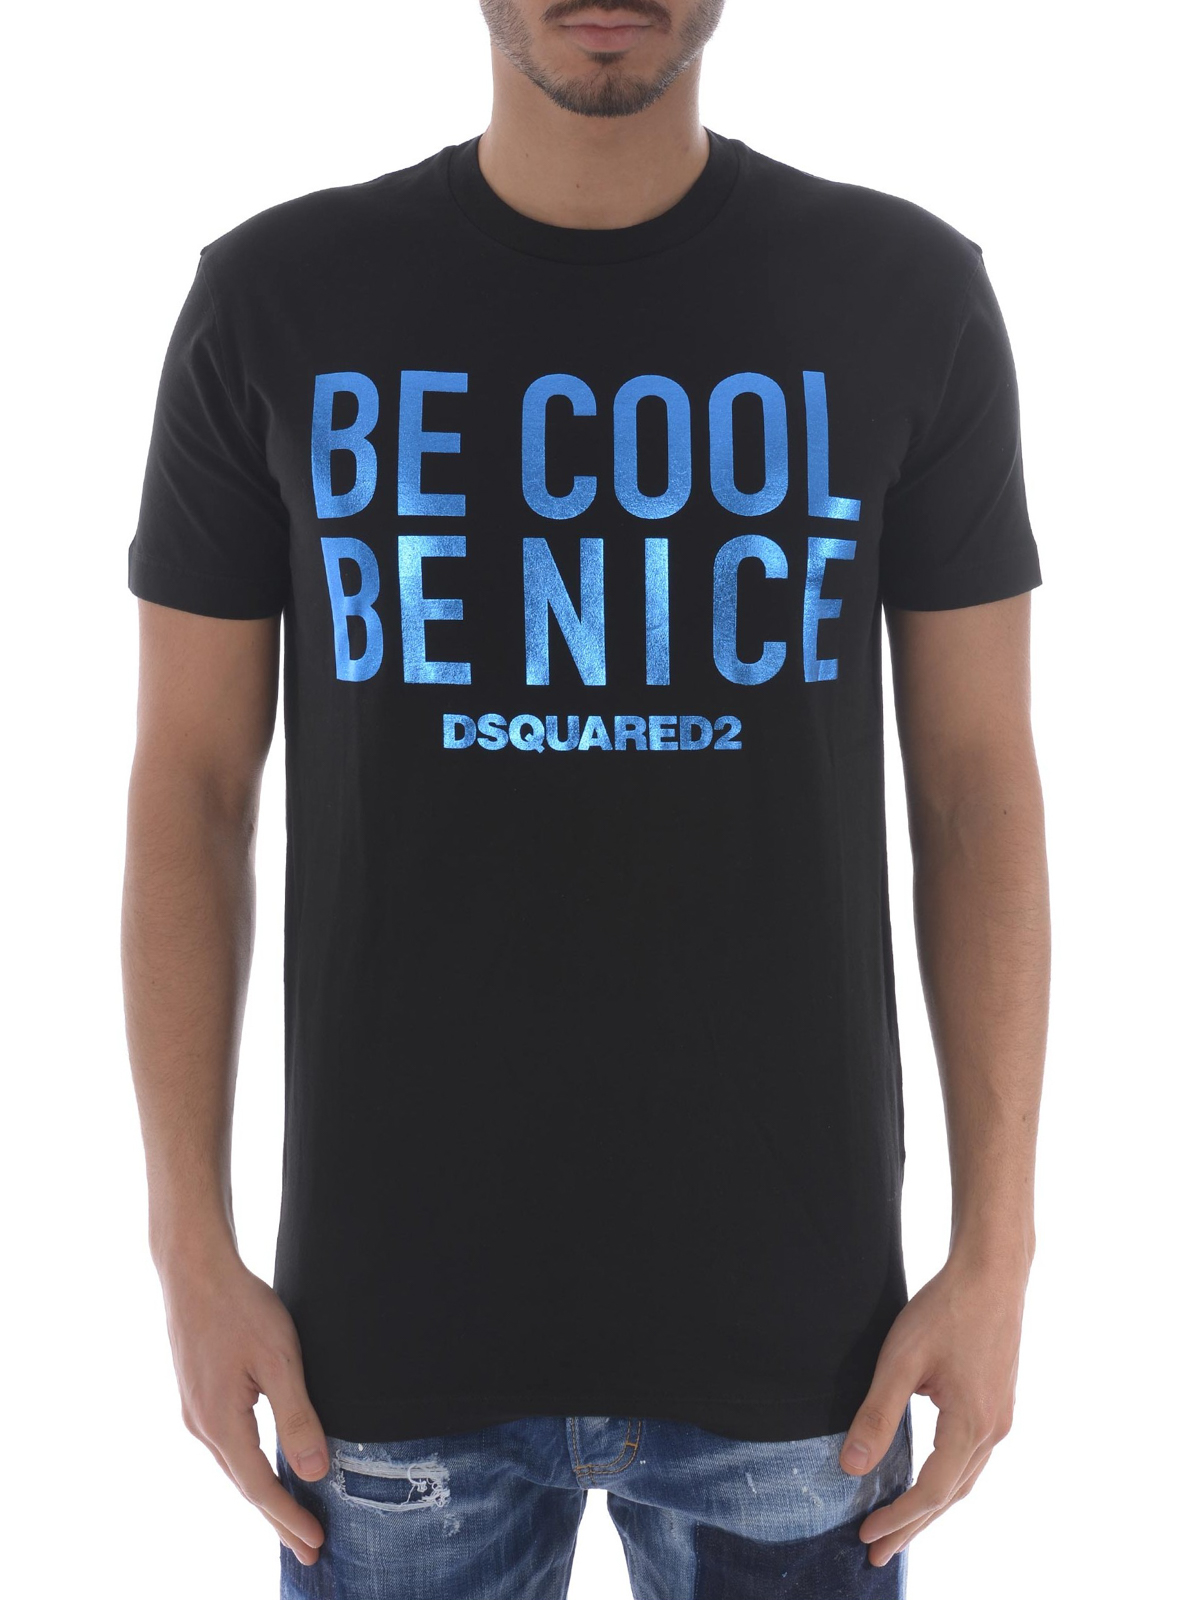 be cool be nice dsquared